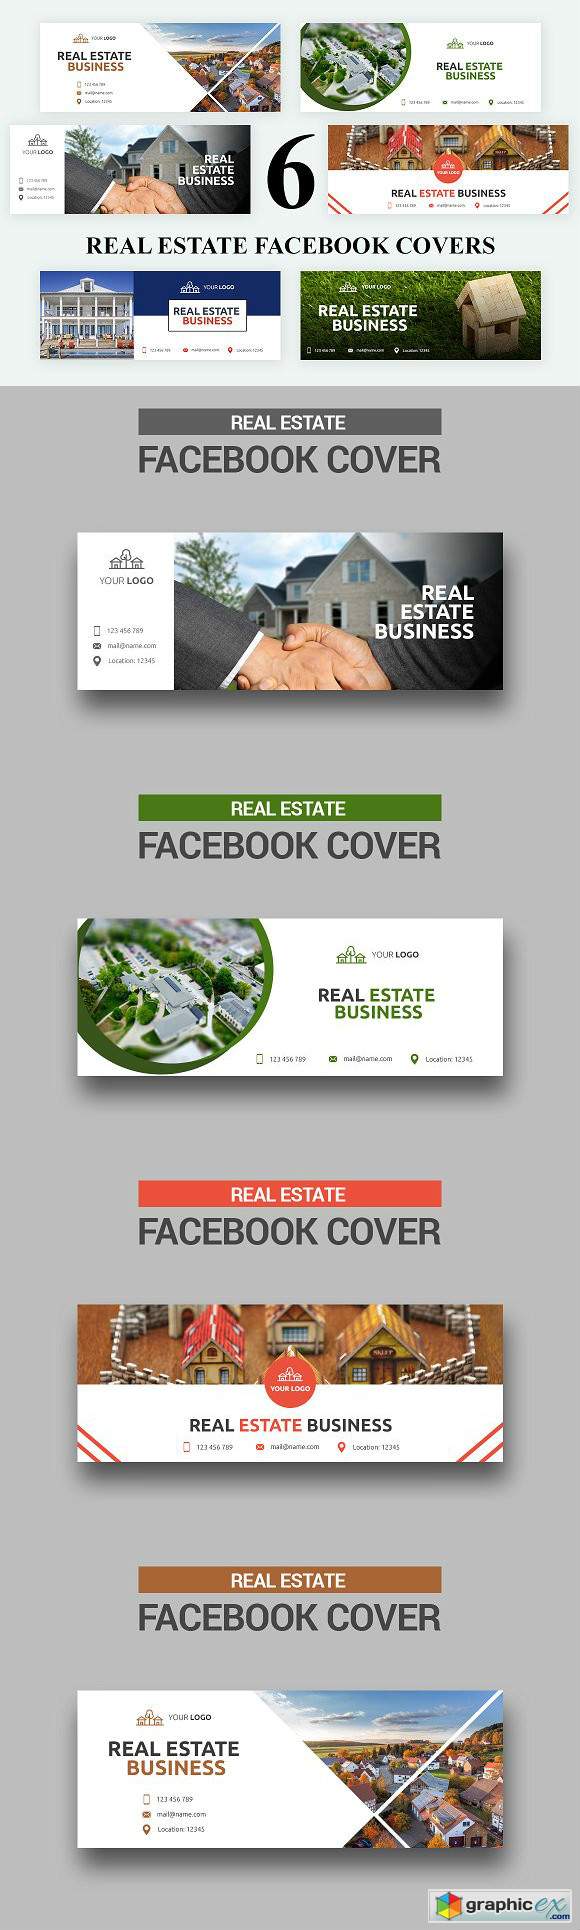 Real Estate Facebook Covers - SK